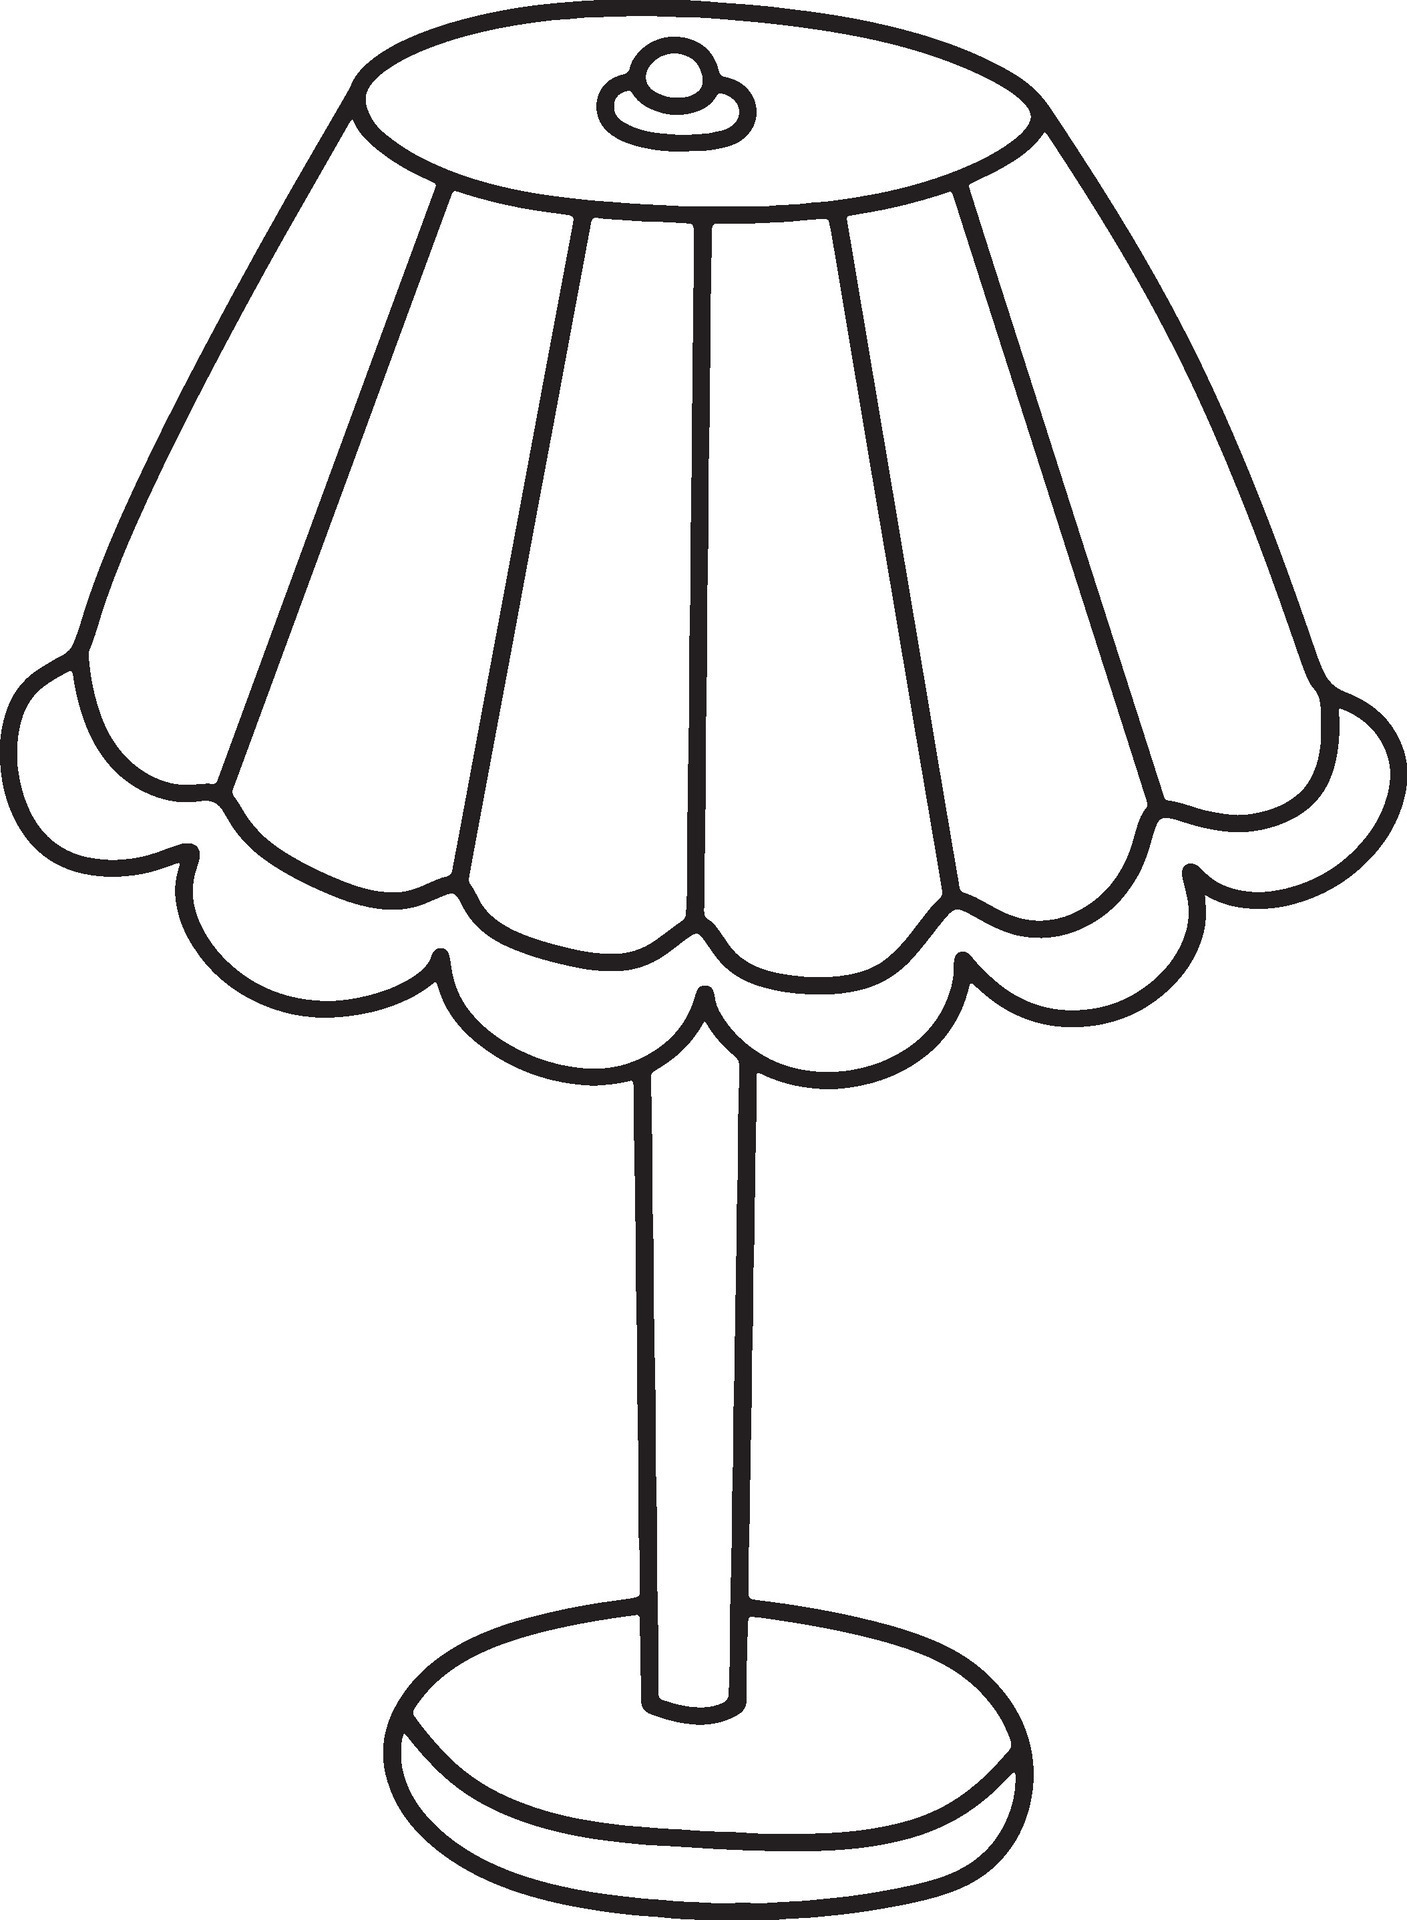 Doodle Outline Vector Illustration of a Lamp with Flowers. Cute